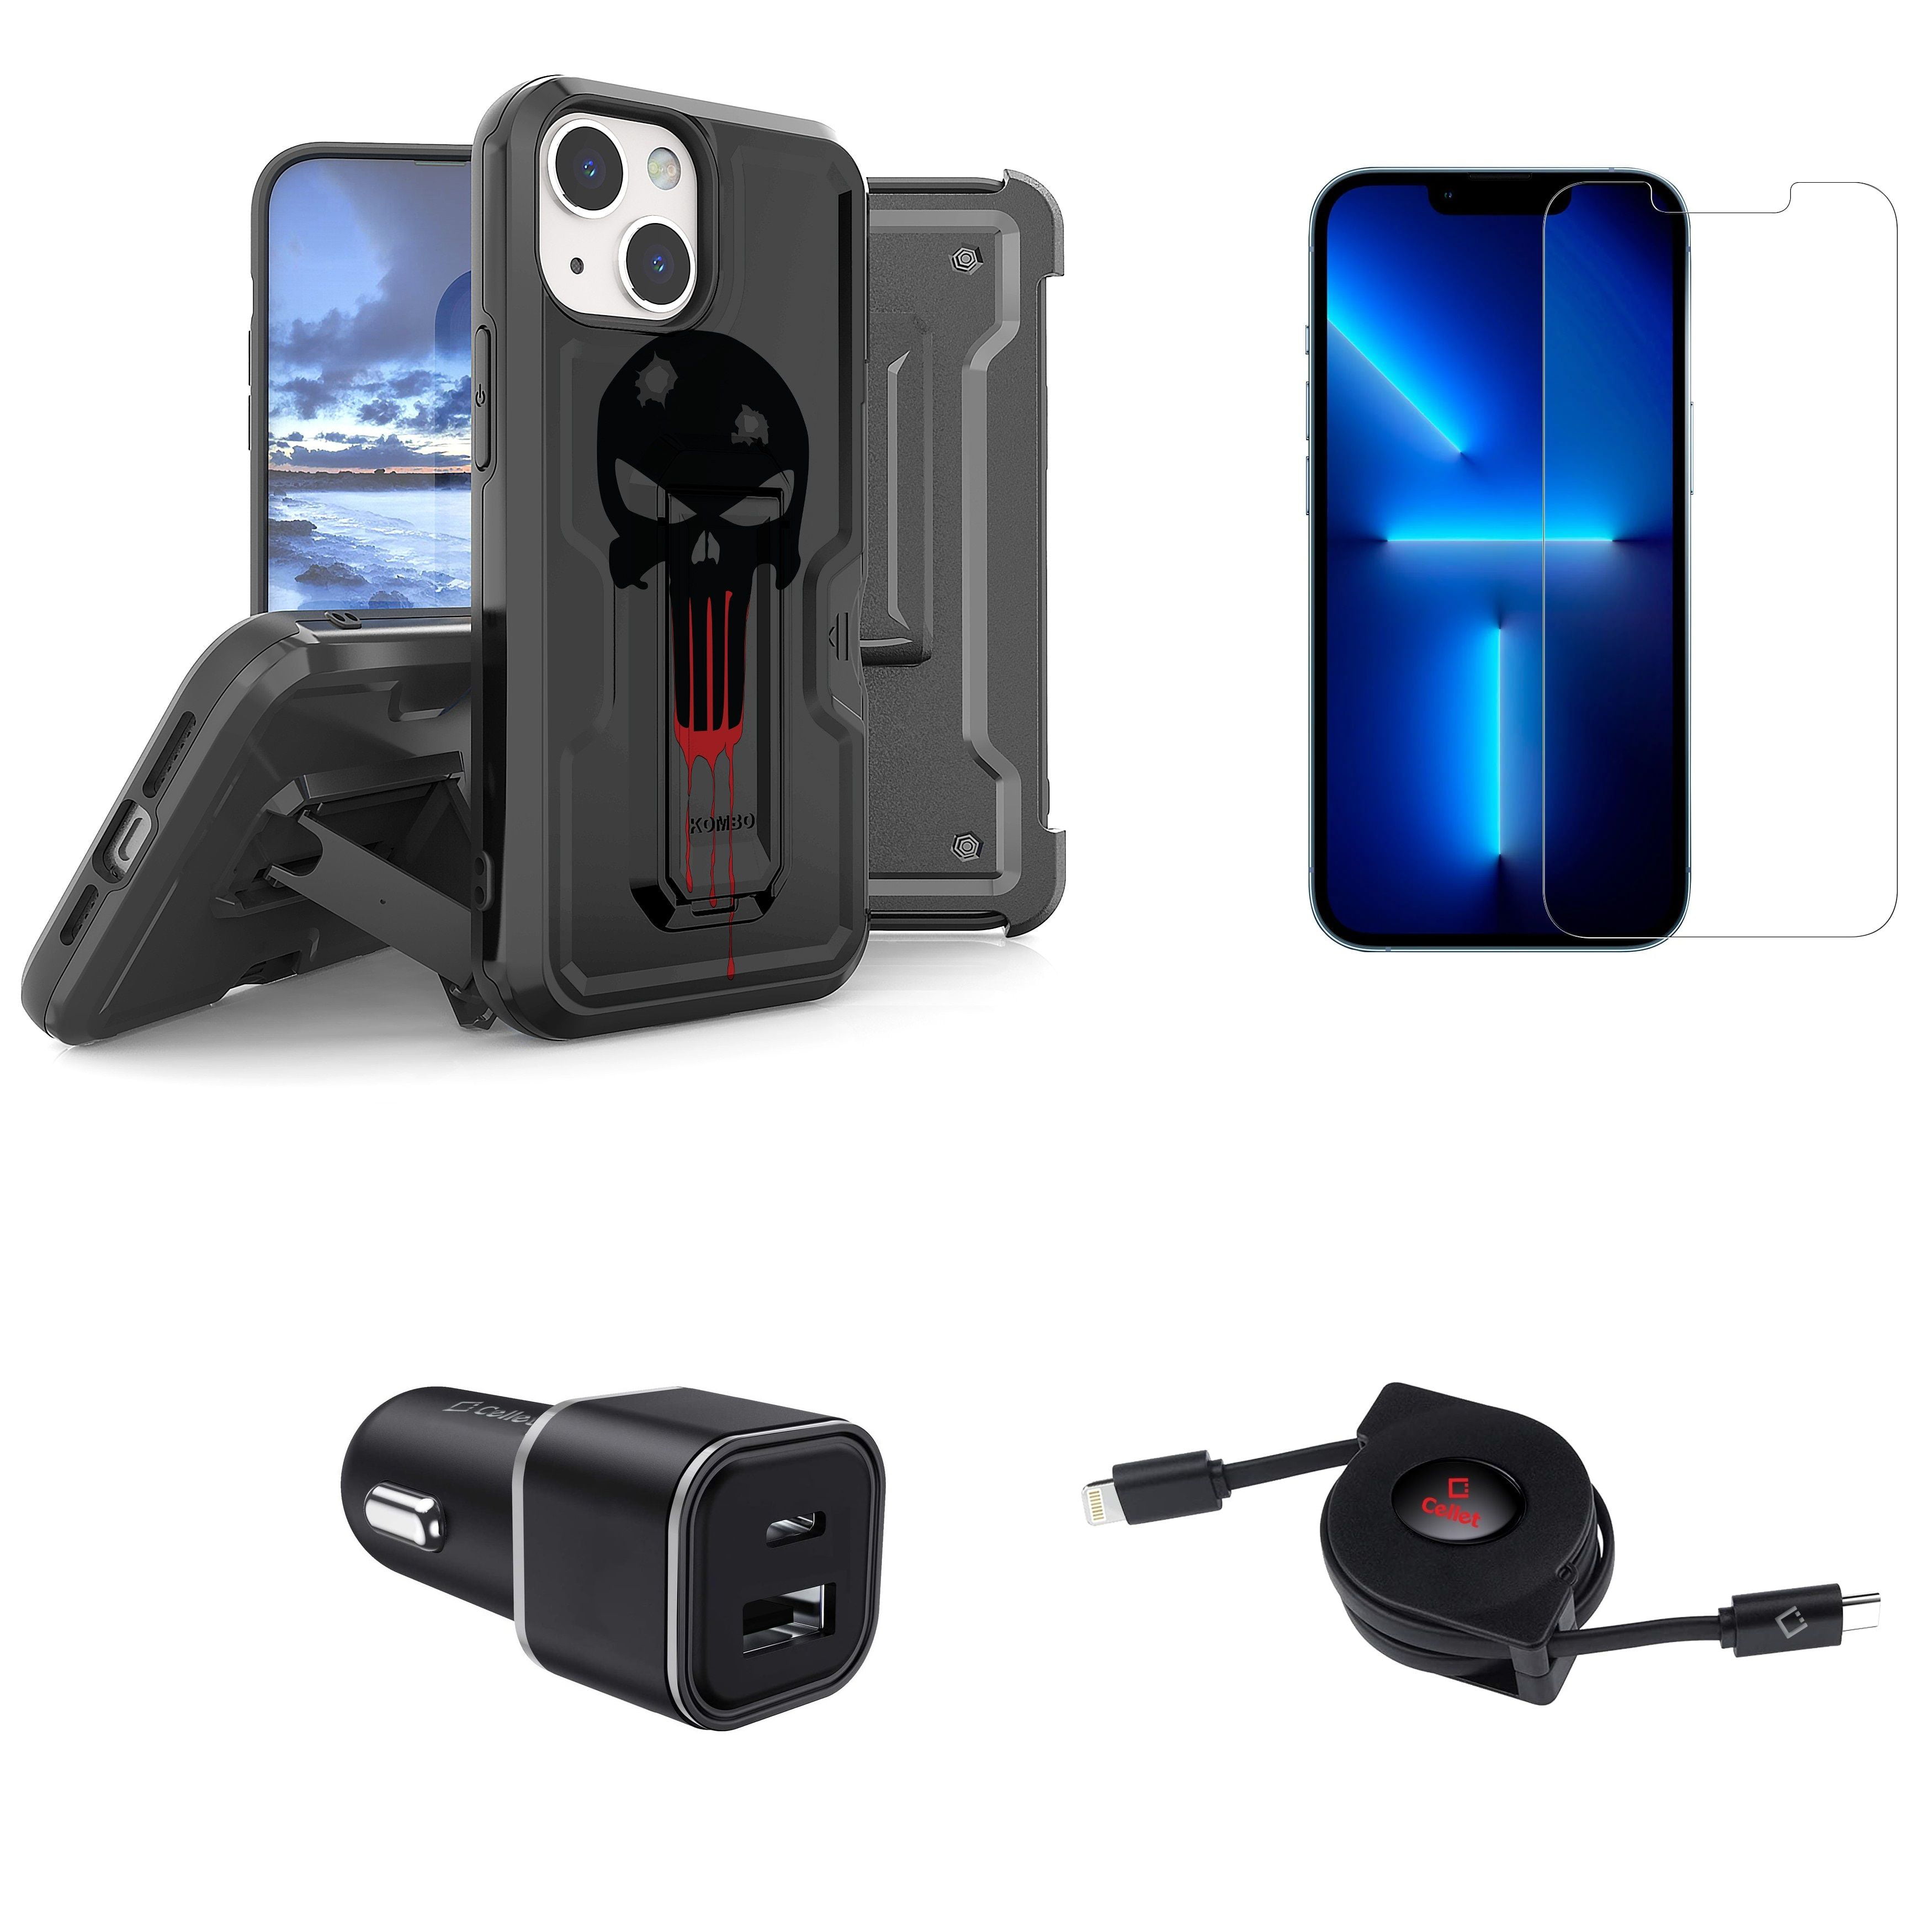 Accessories Bundle for iPhone 11 Case - Heavy Duty Rugged Cover Skull), Belt Holster Clip, Screen Protectors, 30W Car Charger, Retractable USB C to Cable - Walmart.com